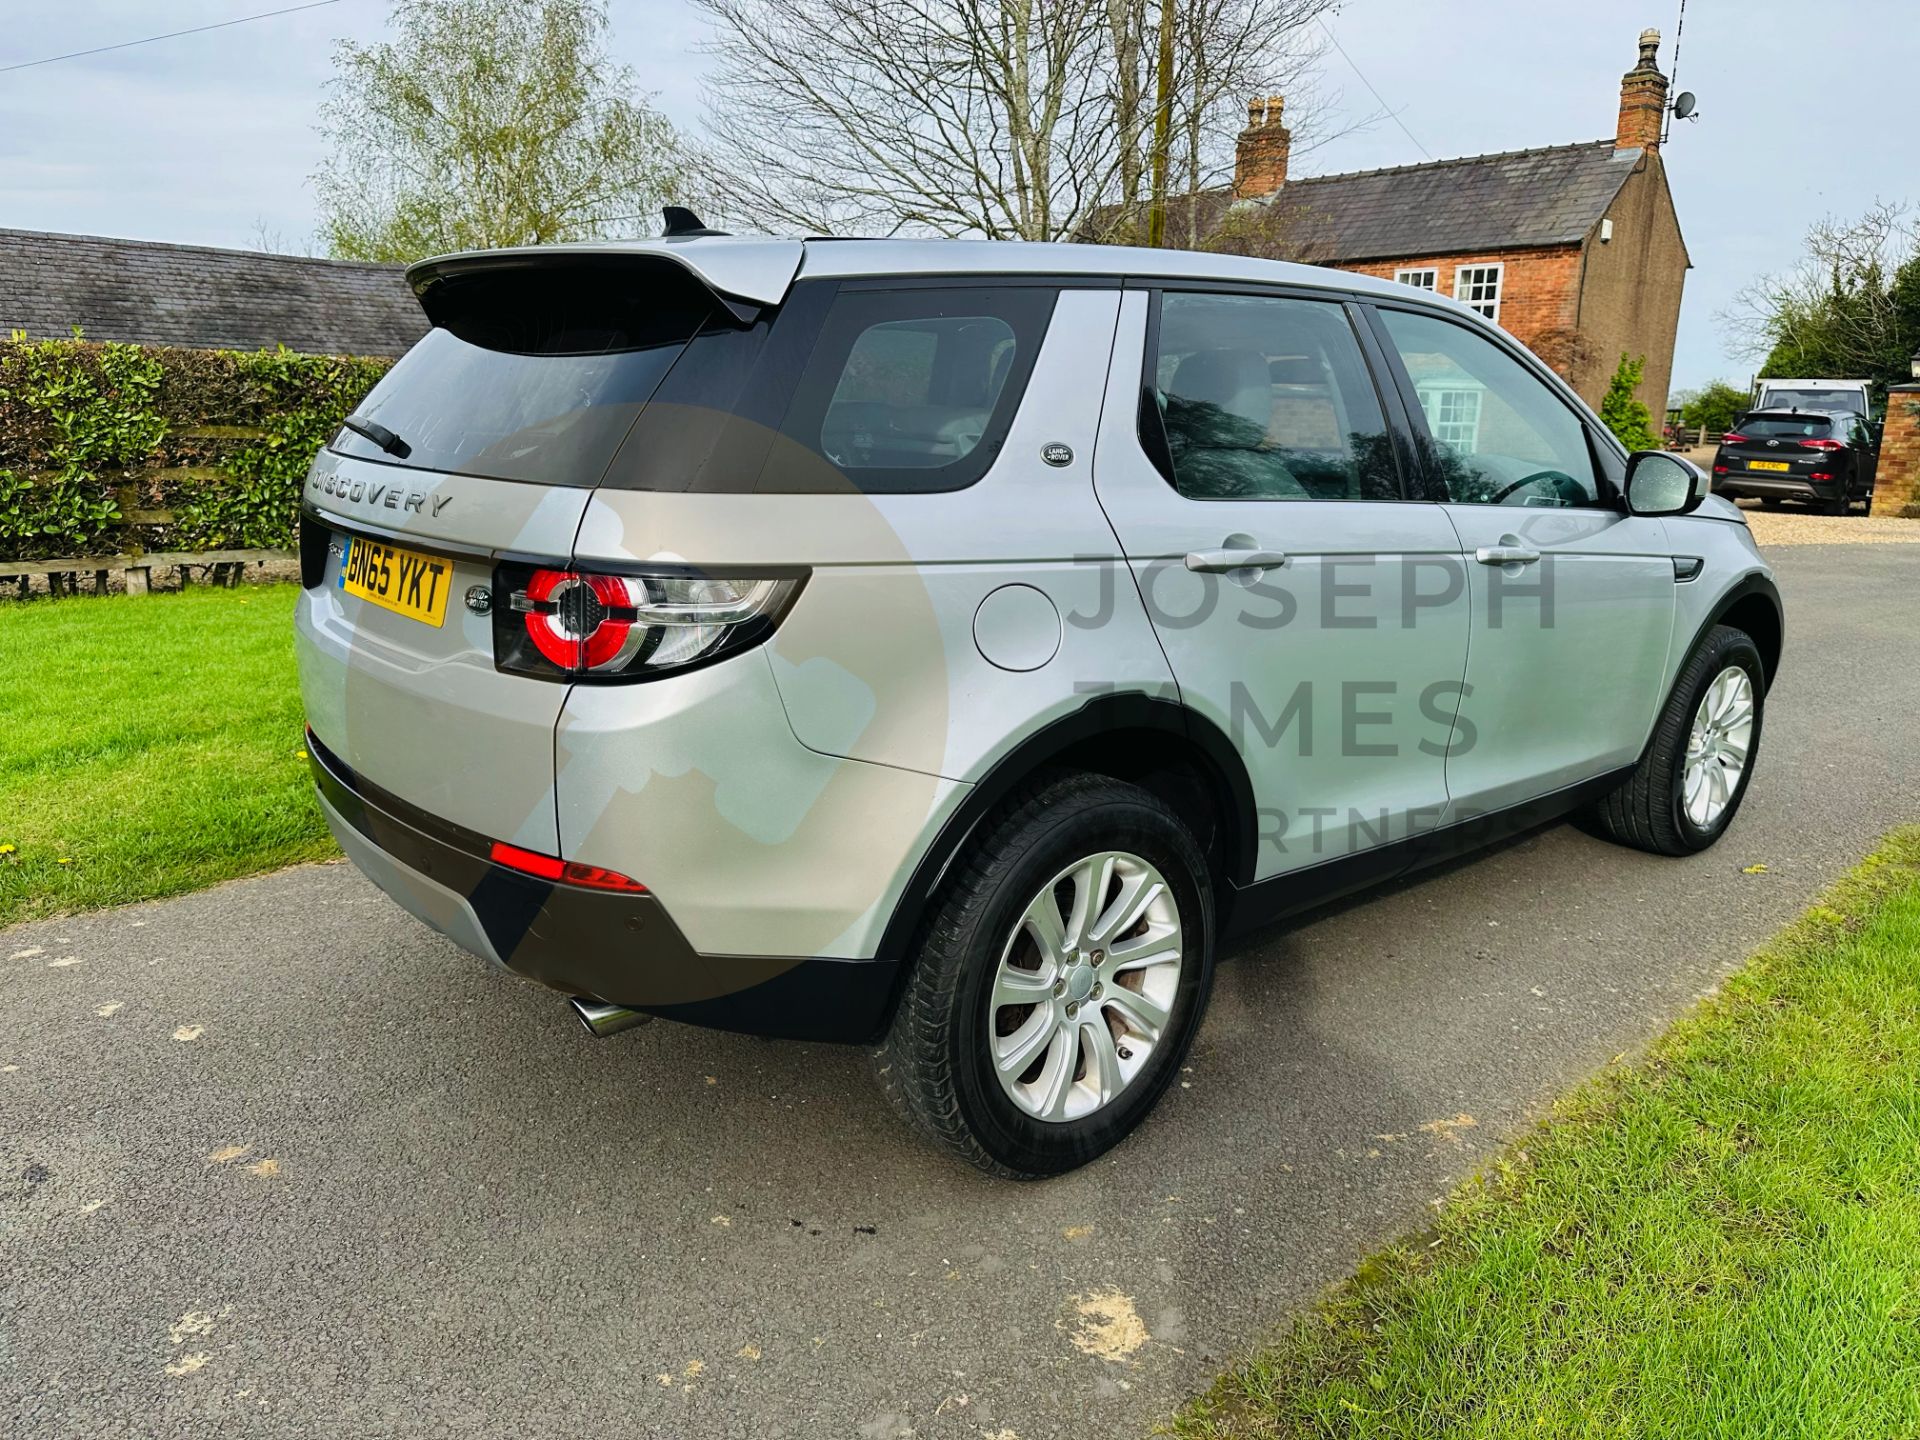 (On Sale) LAND ROVER DISCOVERY SPORT *SE TECH* 7 SEATER SUV (2016 - EURO 6) 2.0 TD4 - AUTO *NO VAT* - Image 9 of 41